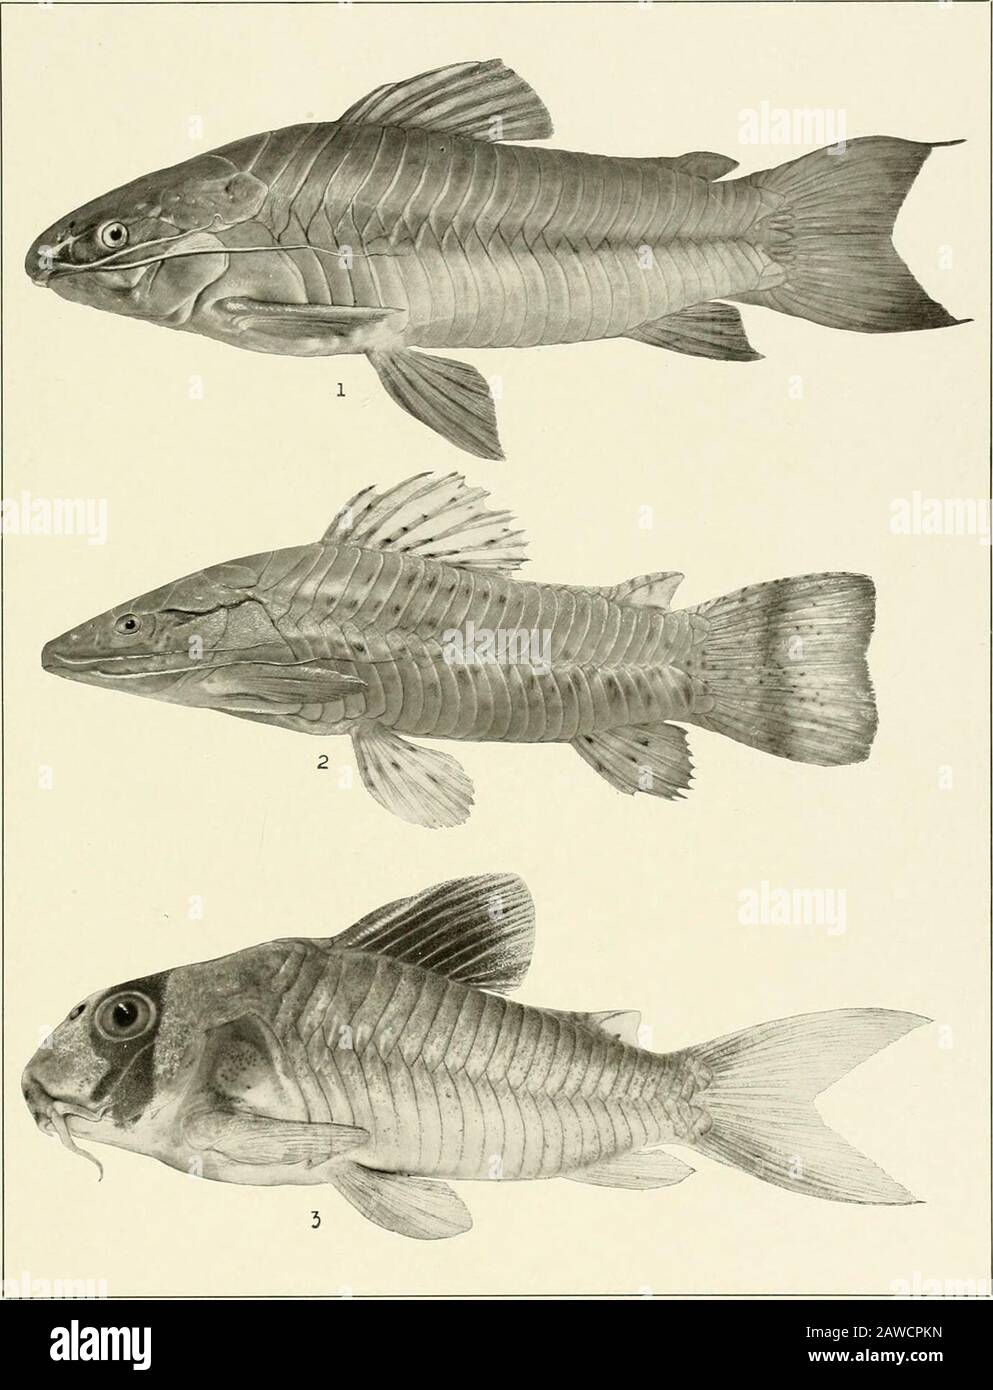 The freshwater fishes of British Guiana, including a study of the ecological grouping of species and the relation of the fauna of the plateau to that of the lowlands . v^:v Memoirs Carnegie Museum, Vol. V. Plate XXIV.. 1. Hoplostemum littorale (Hancock). 192 mm. No. 1575. 2. Hoplostemum thoracatum (Cuvieb andValenciennes). 110 mm. No. 1579. 3- Corydorus punctatus (Bloch). 51mm. No. 1561. Memoirs Carnegie Museum, Vol. V. Plate XXV. .•-S^jSMv Stock Photo